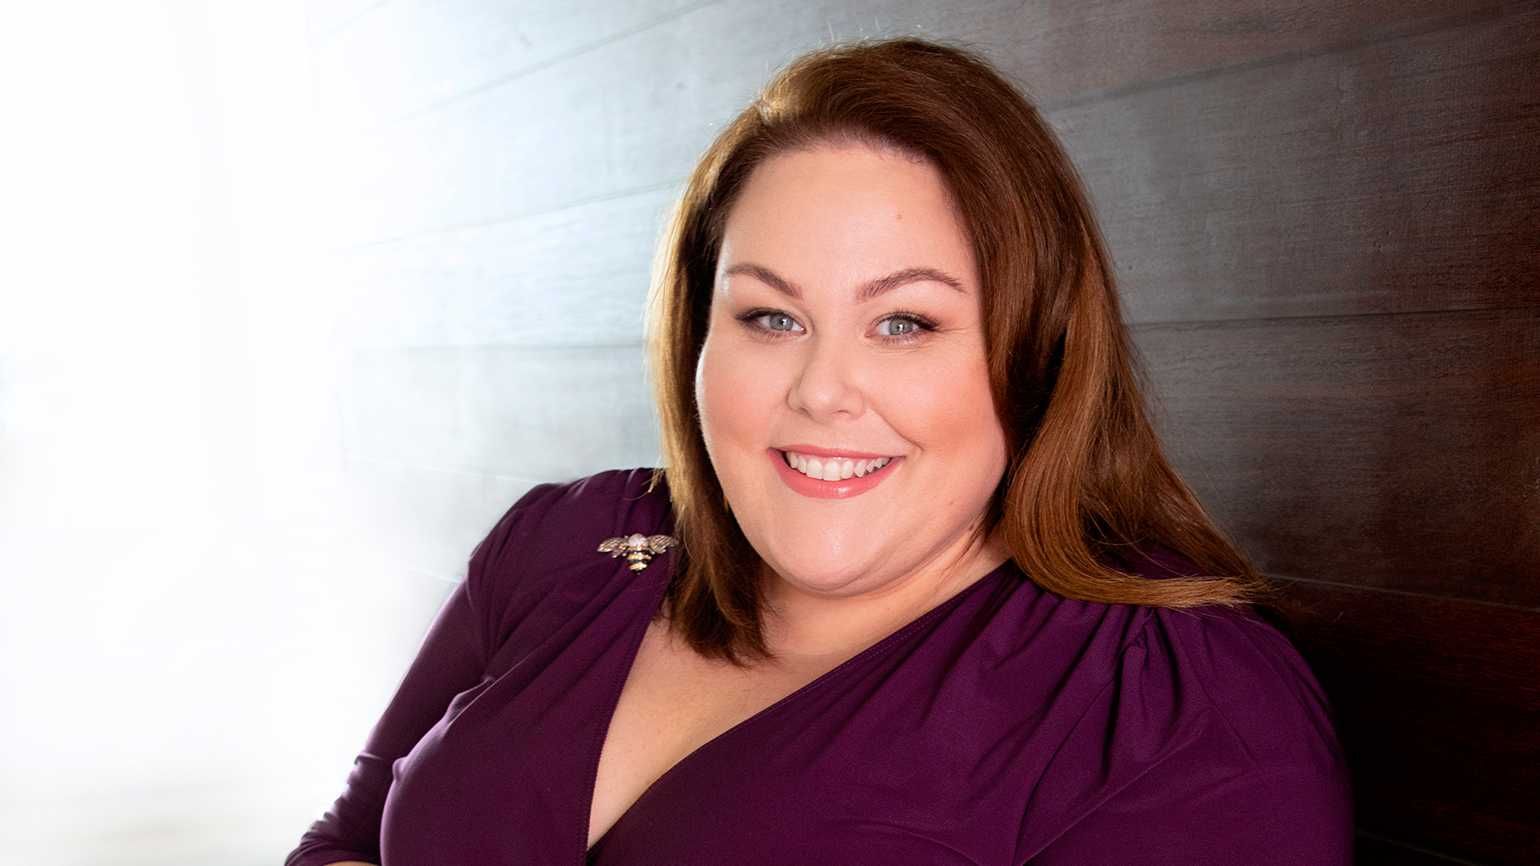 'This Is Us' star Chrissy Metz